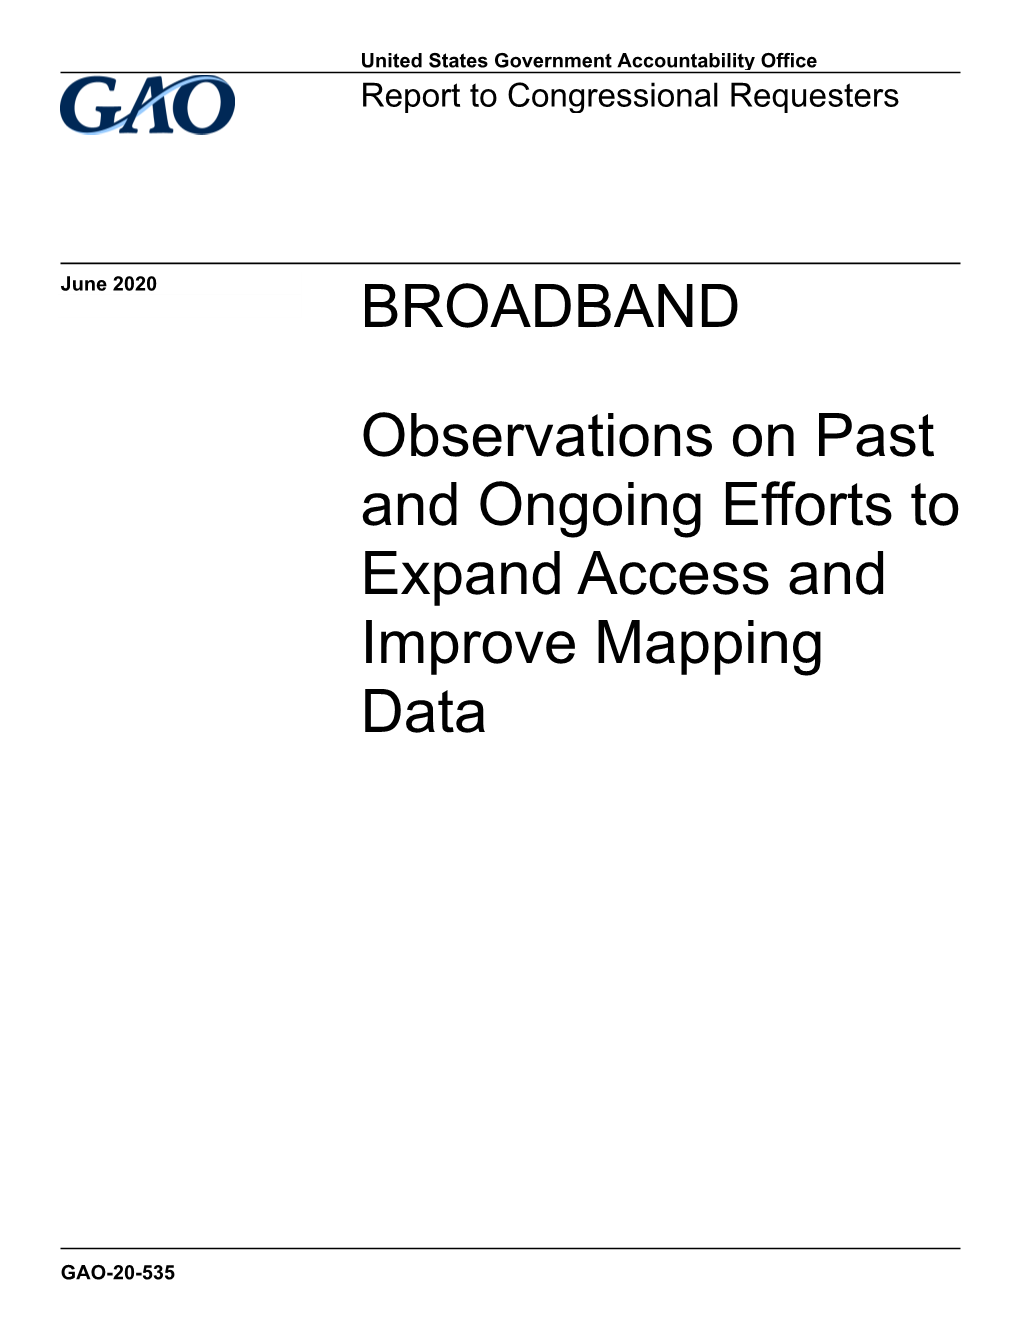 Broadband: Observations on Past and Ongoing Efforts to Expand Access